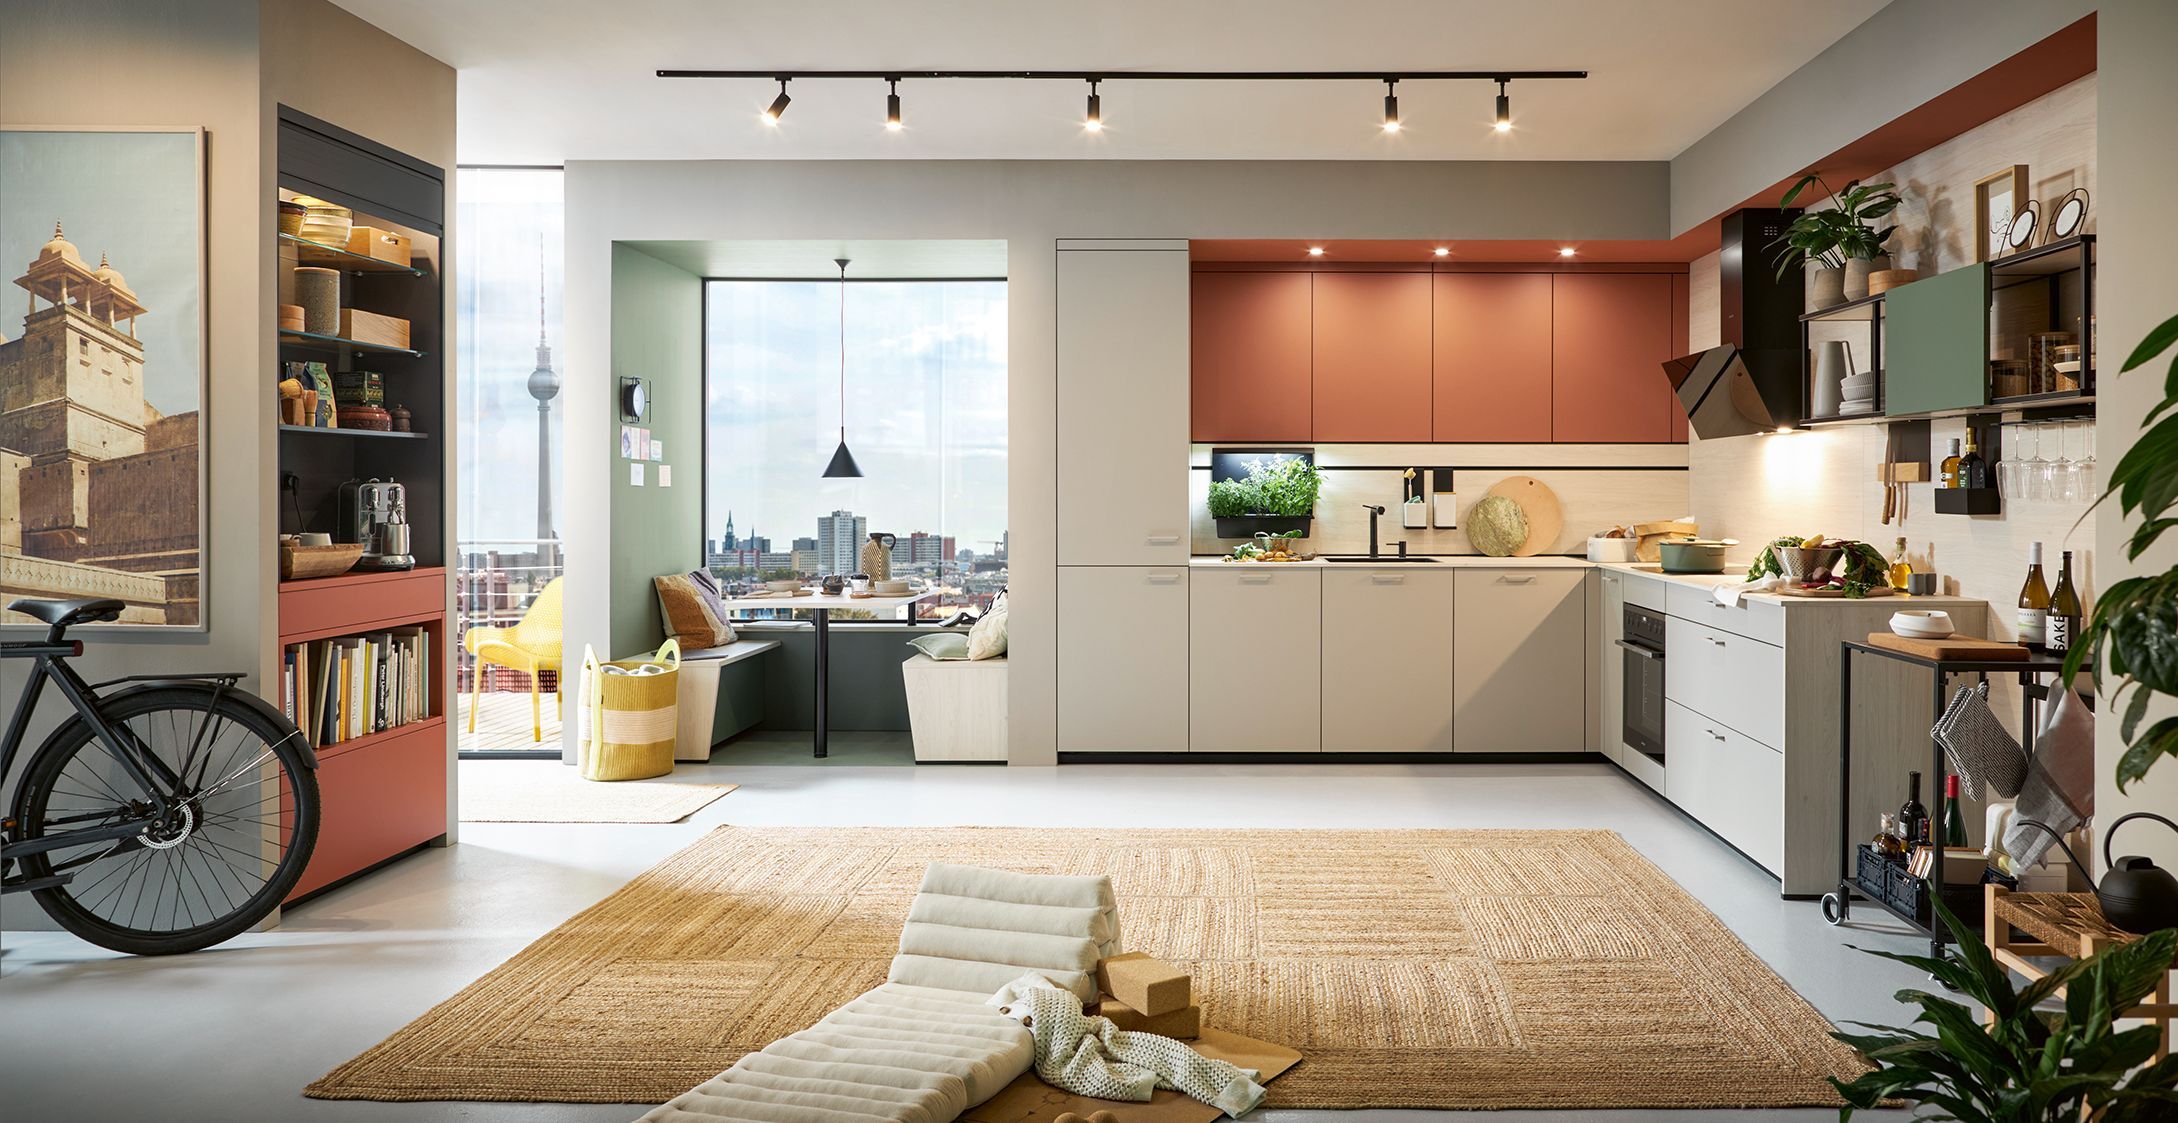 Schueller kitchen with sustainable fronts